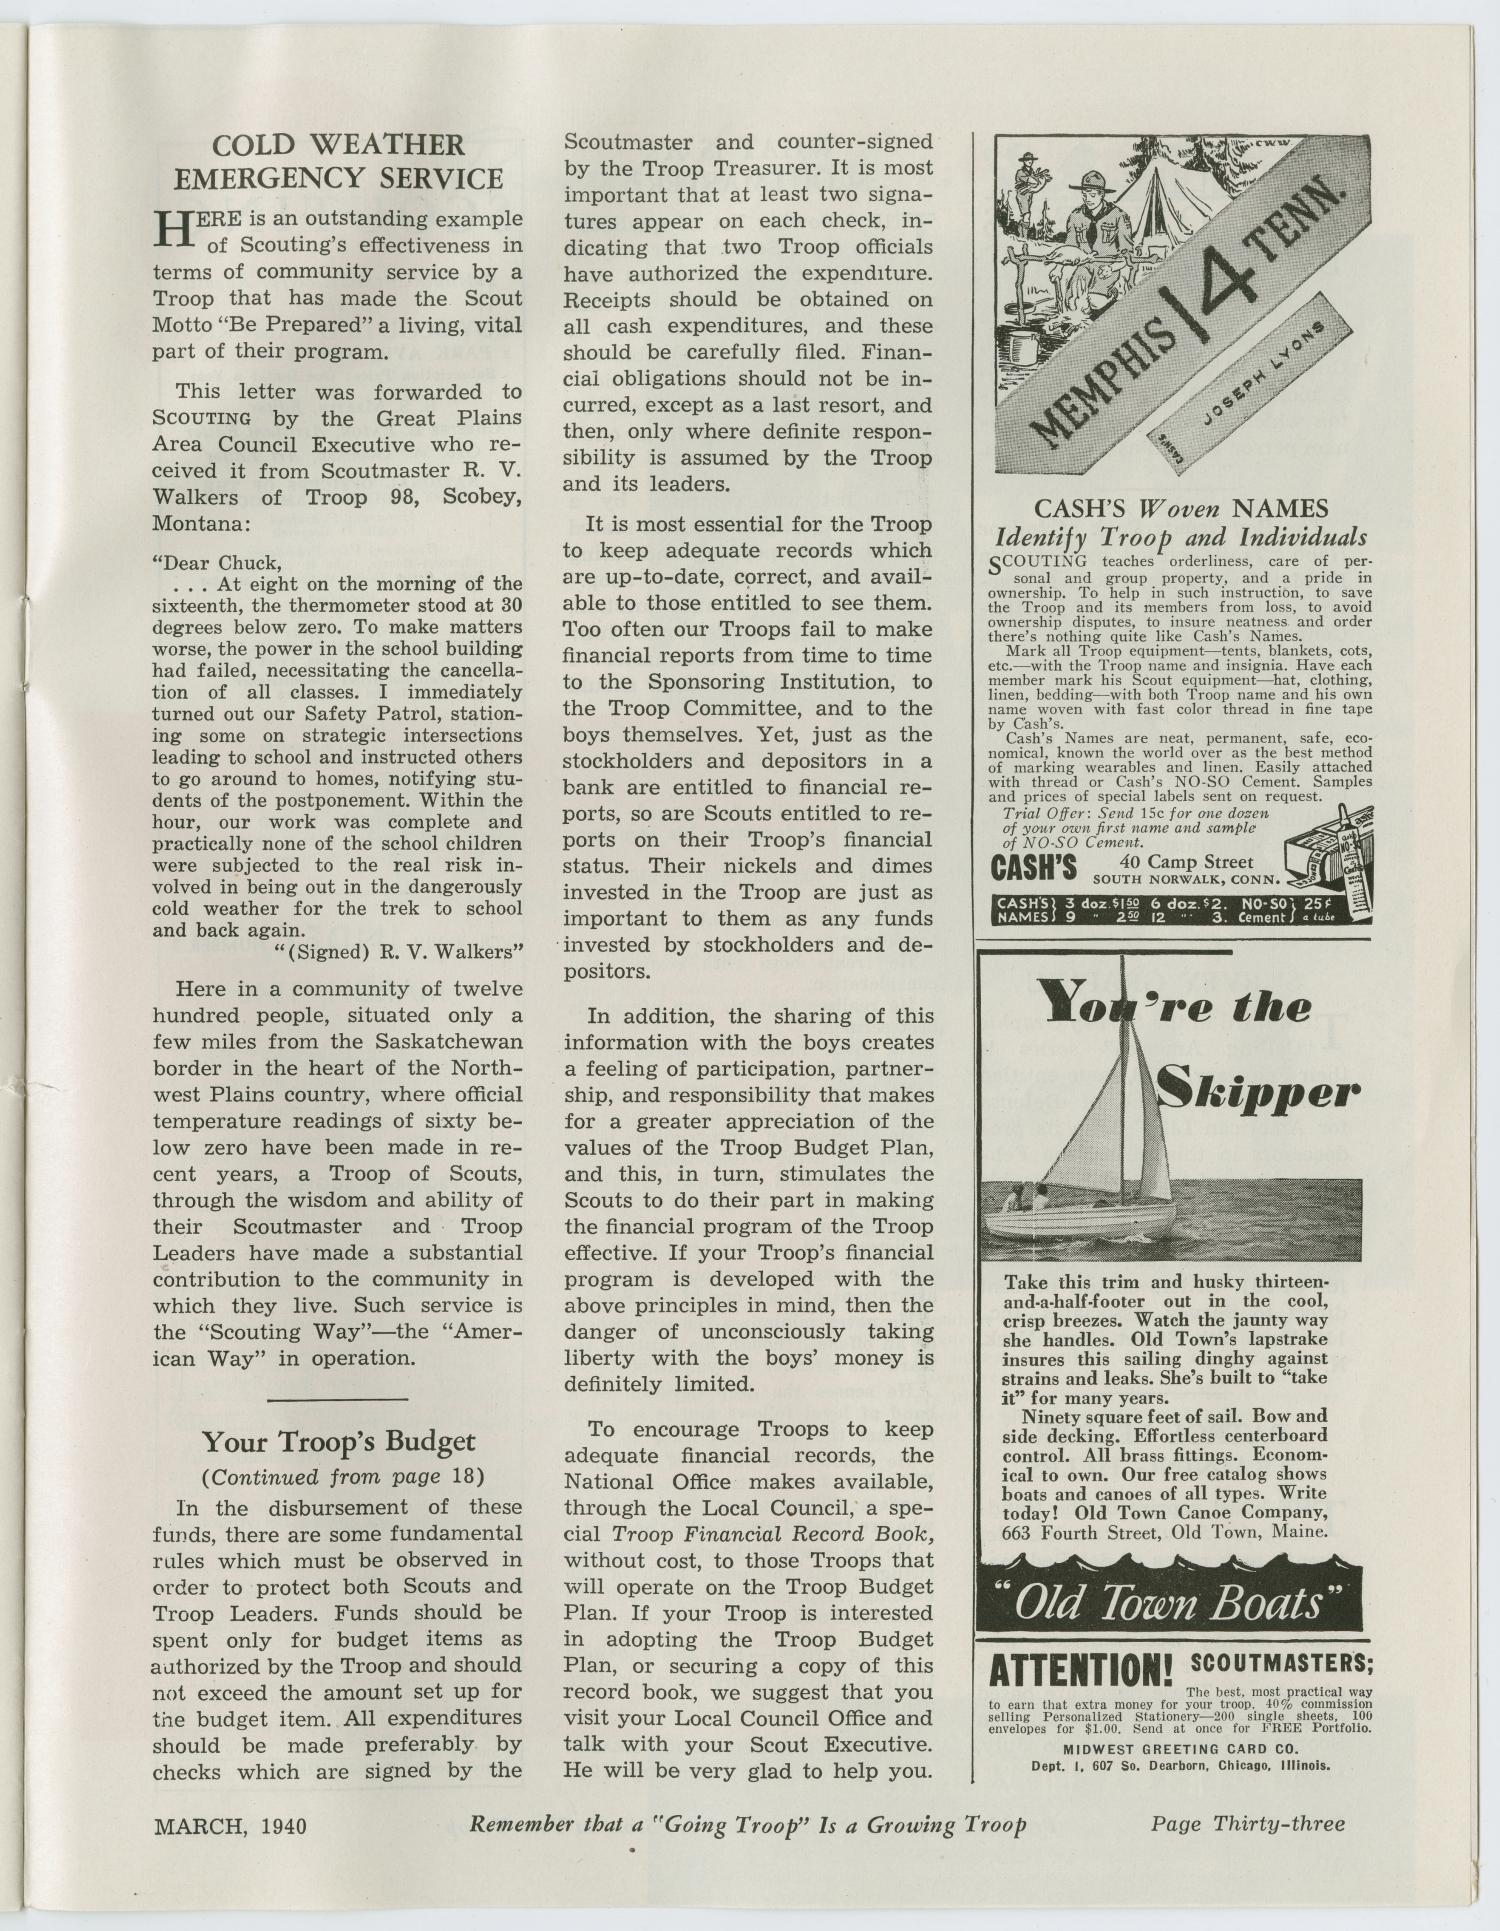 Scouting, Volume 28, Number 3, March 1940
                                                
                                                    33
                                                